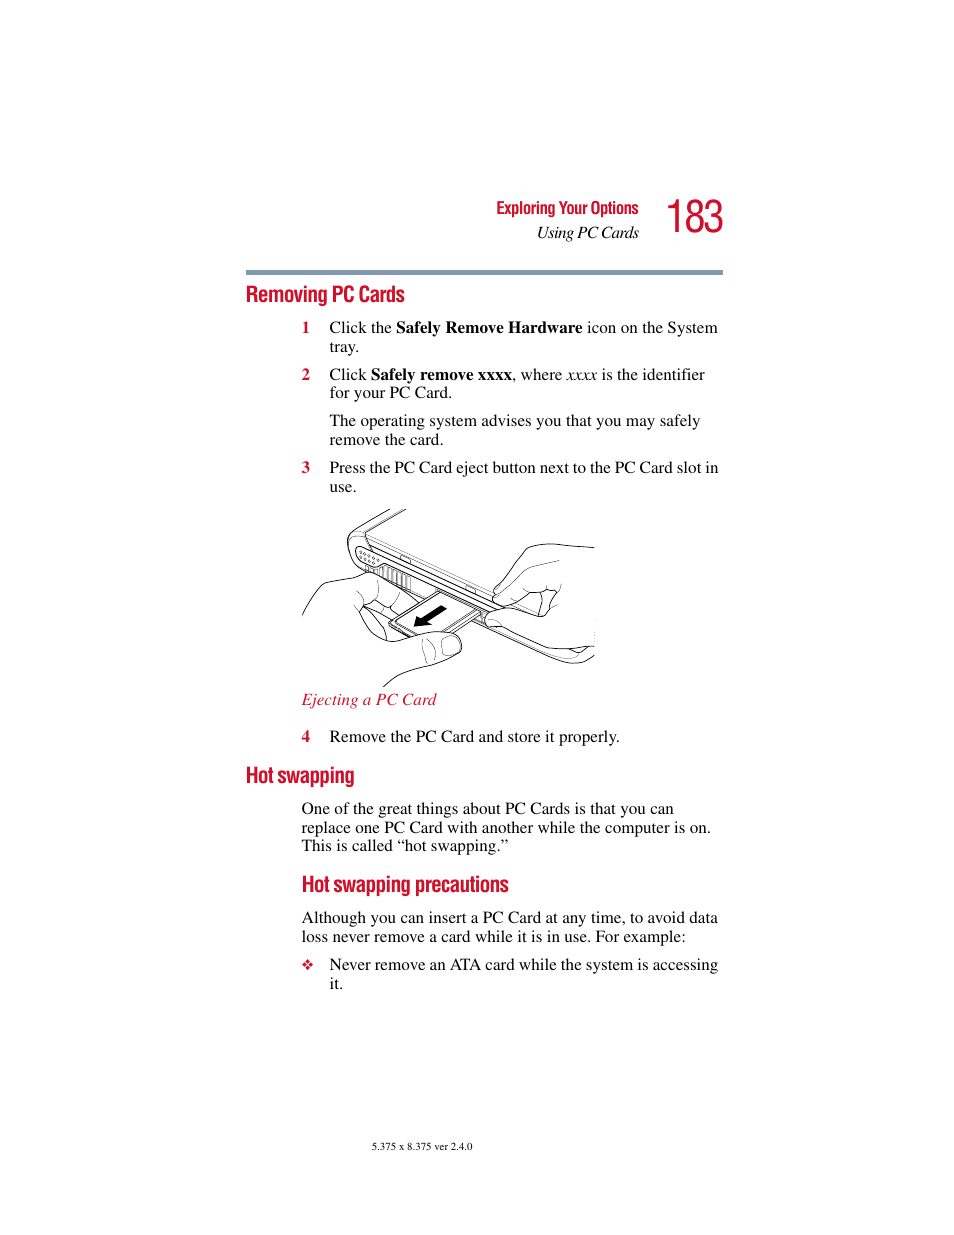 Removing pc cards, Hot swapping, Removing pc cards hot swapping | Toshiba 2400 User Manual | Page 183 / 300